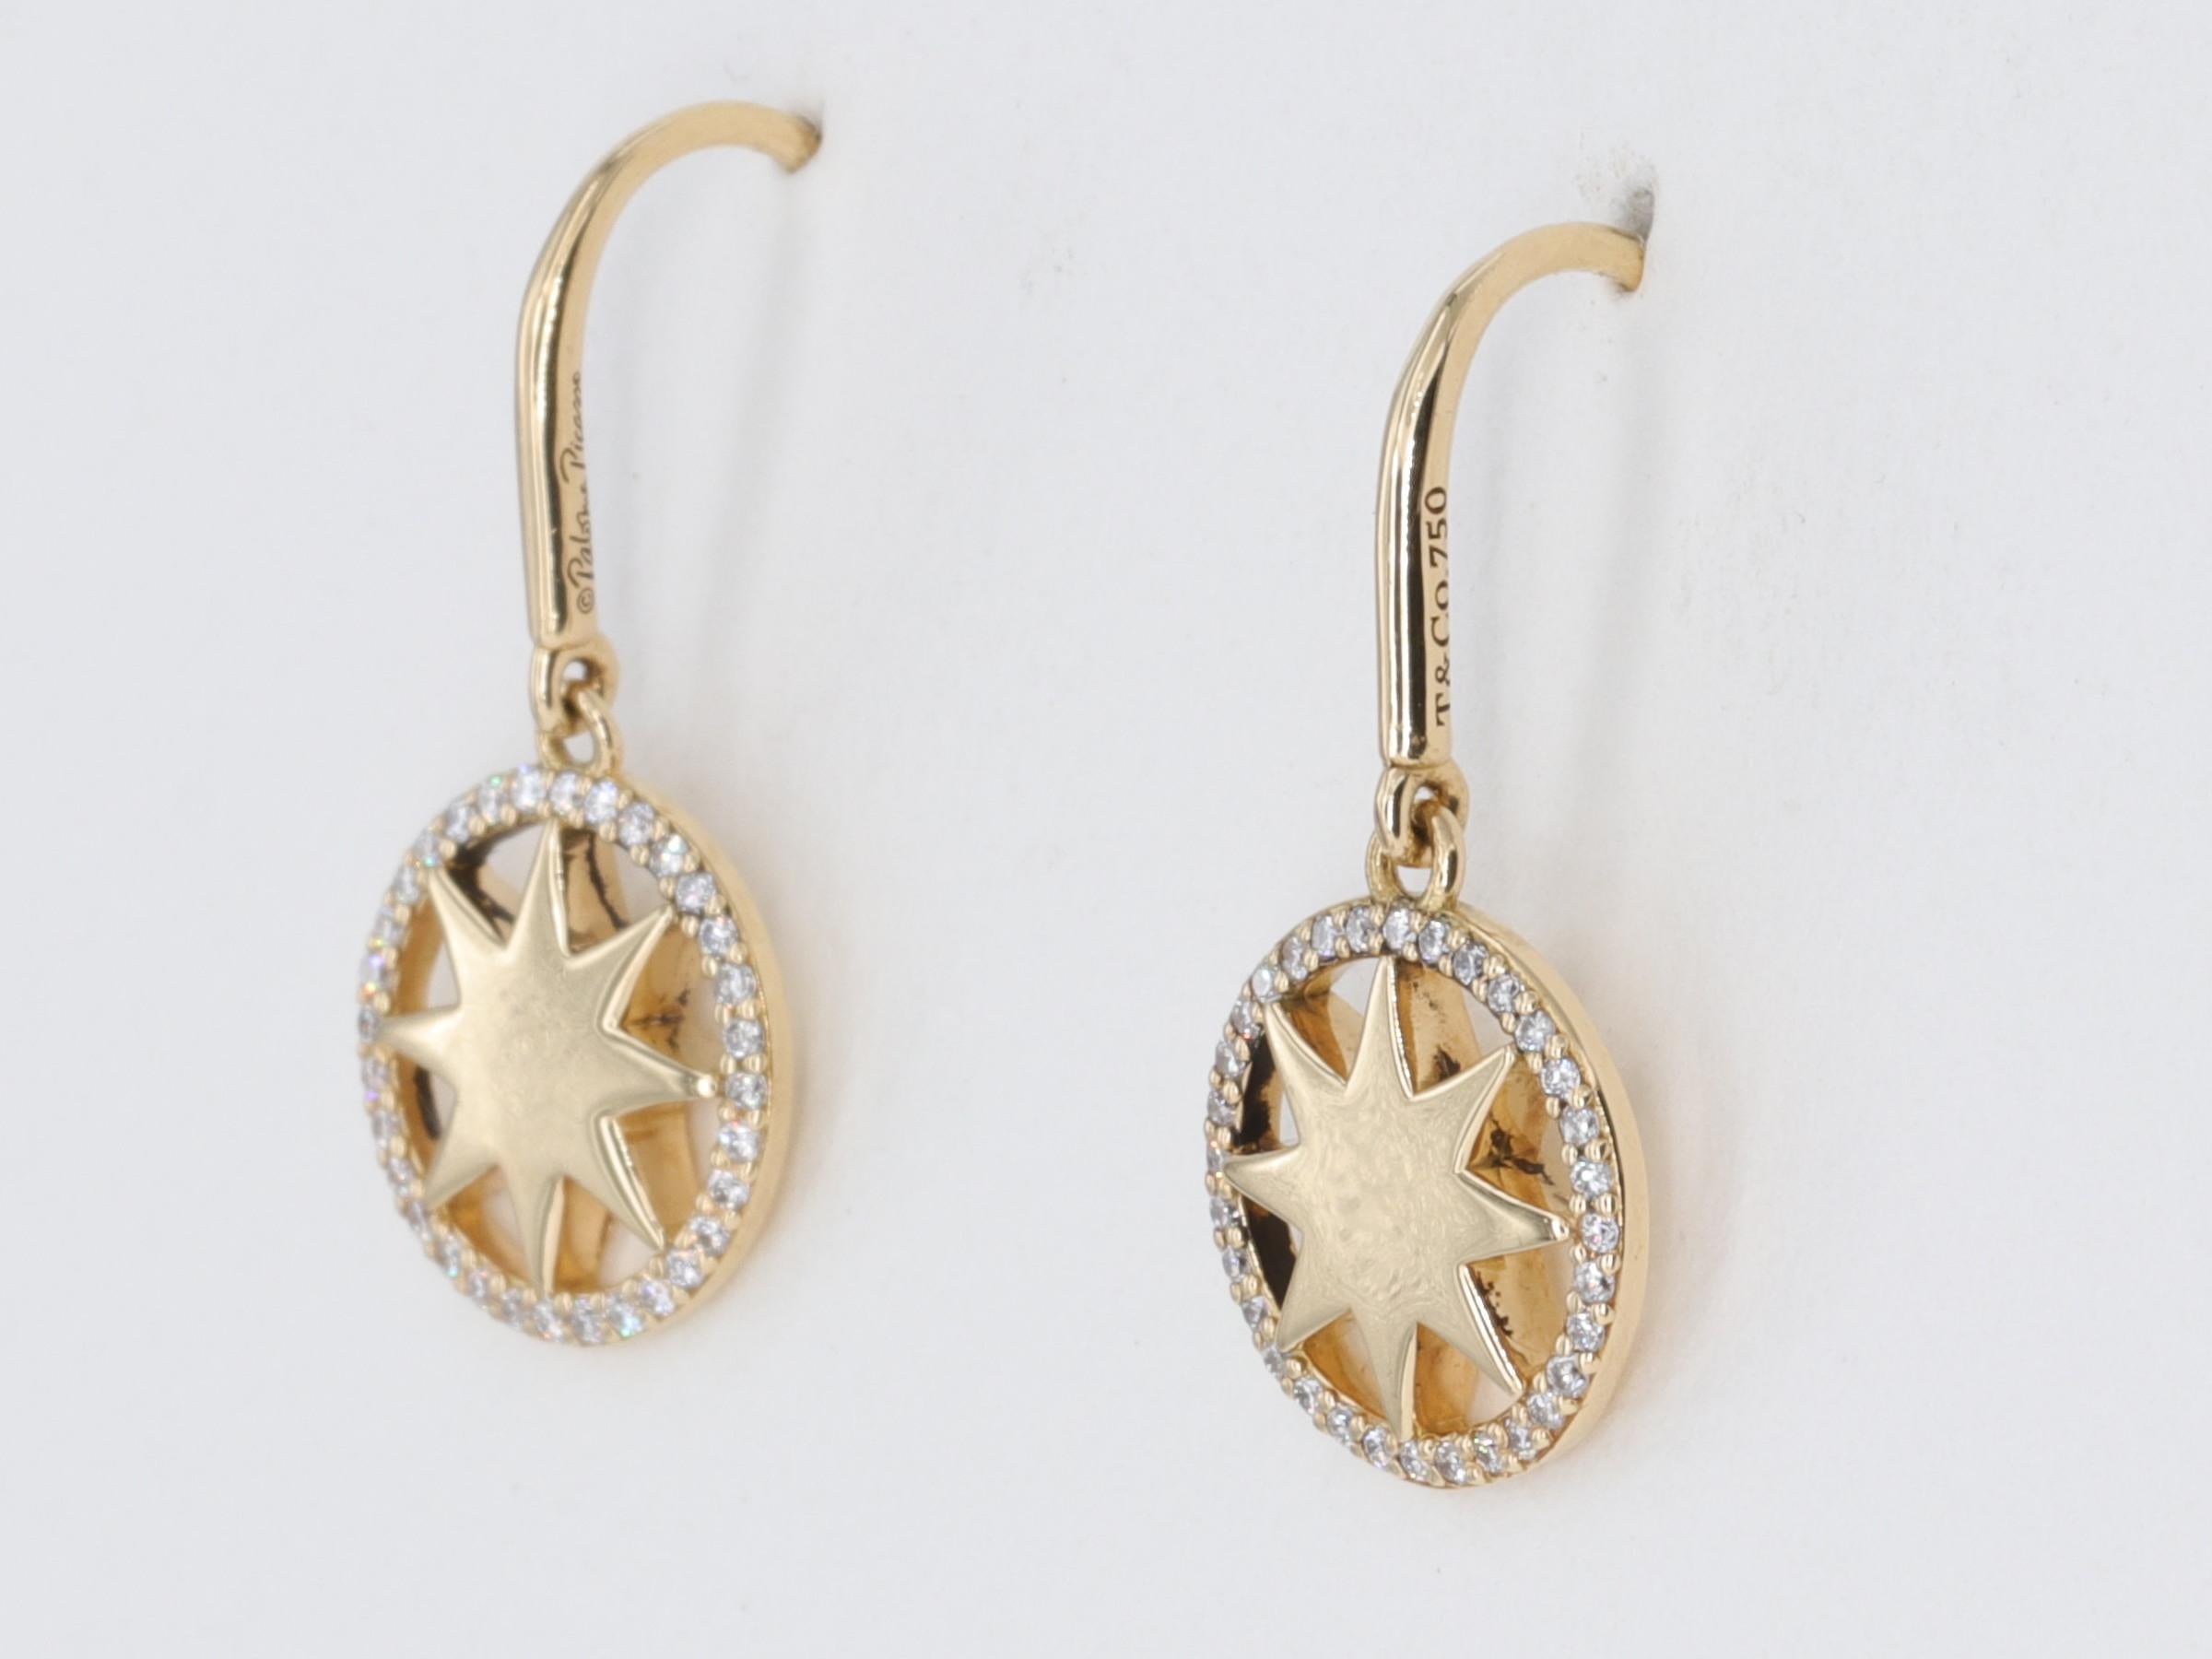 Tiffany & Co Paloma Picasso Star Drop Earrings Diamonds and Yellow Gold

The earrings contain approximately .20 carats of round brilliant cut diamonds of E/F color and VVS-VS clarity. 

The earrings are set in 18 karat yellow gold.

Stamped T & Co.